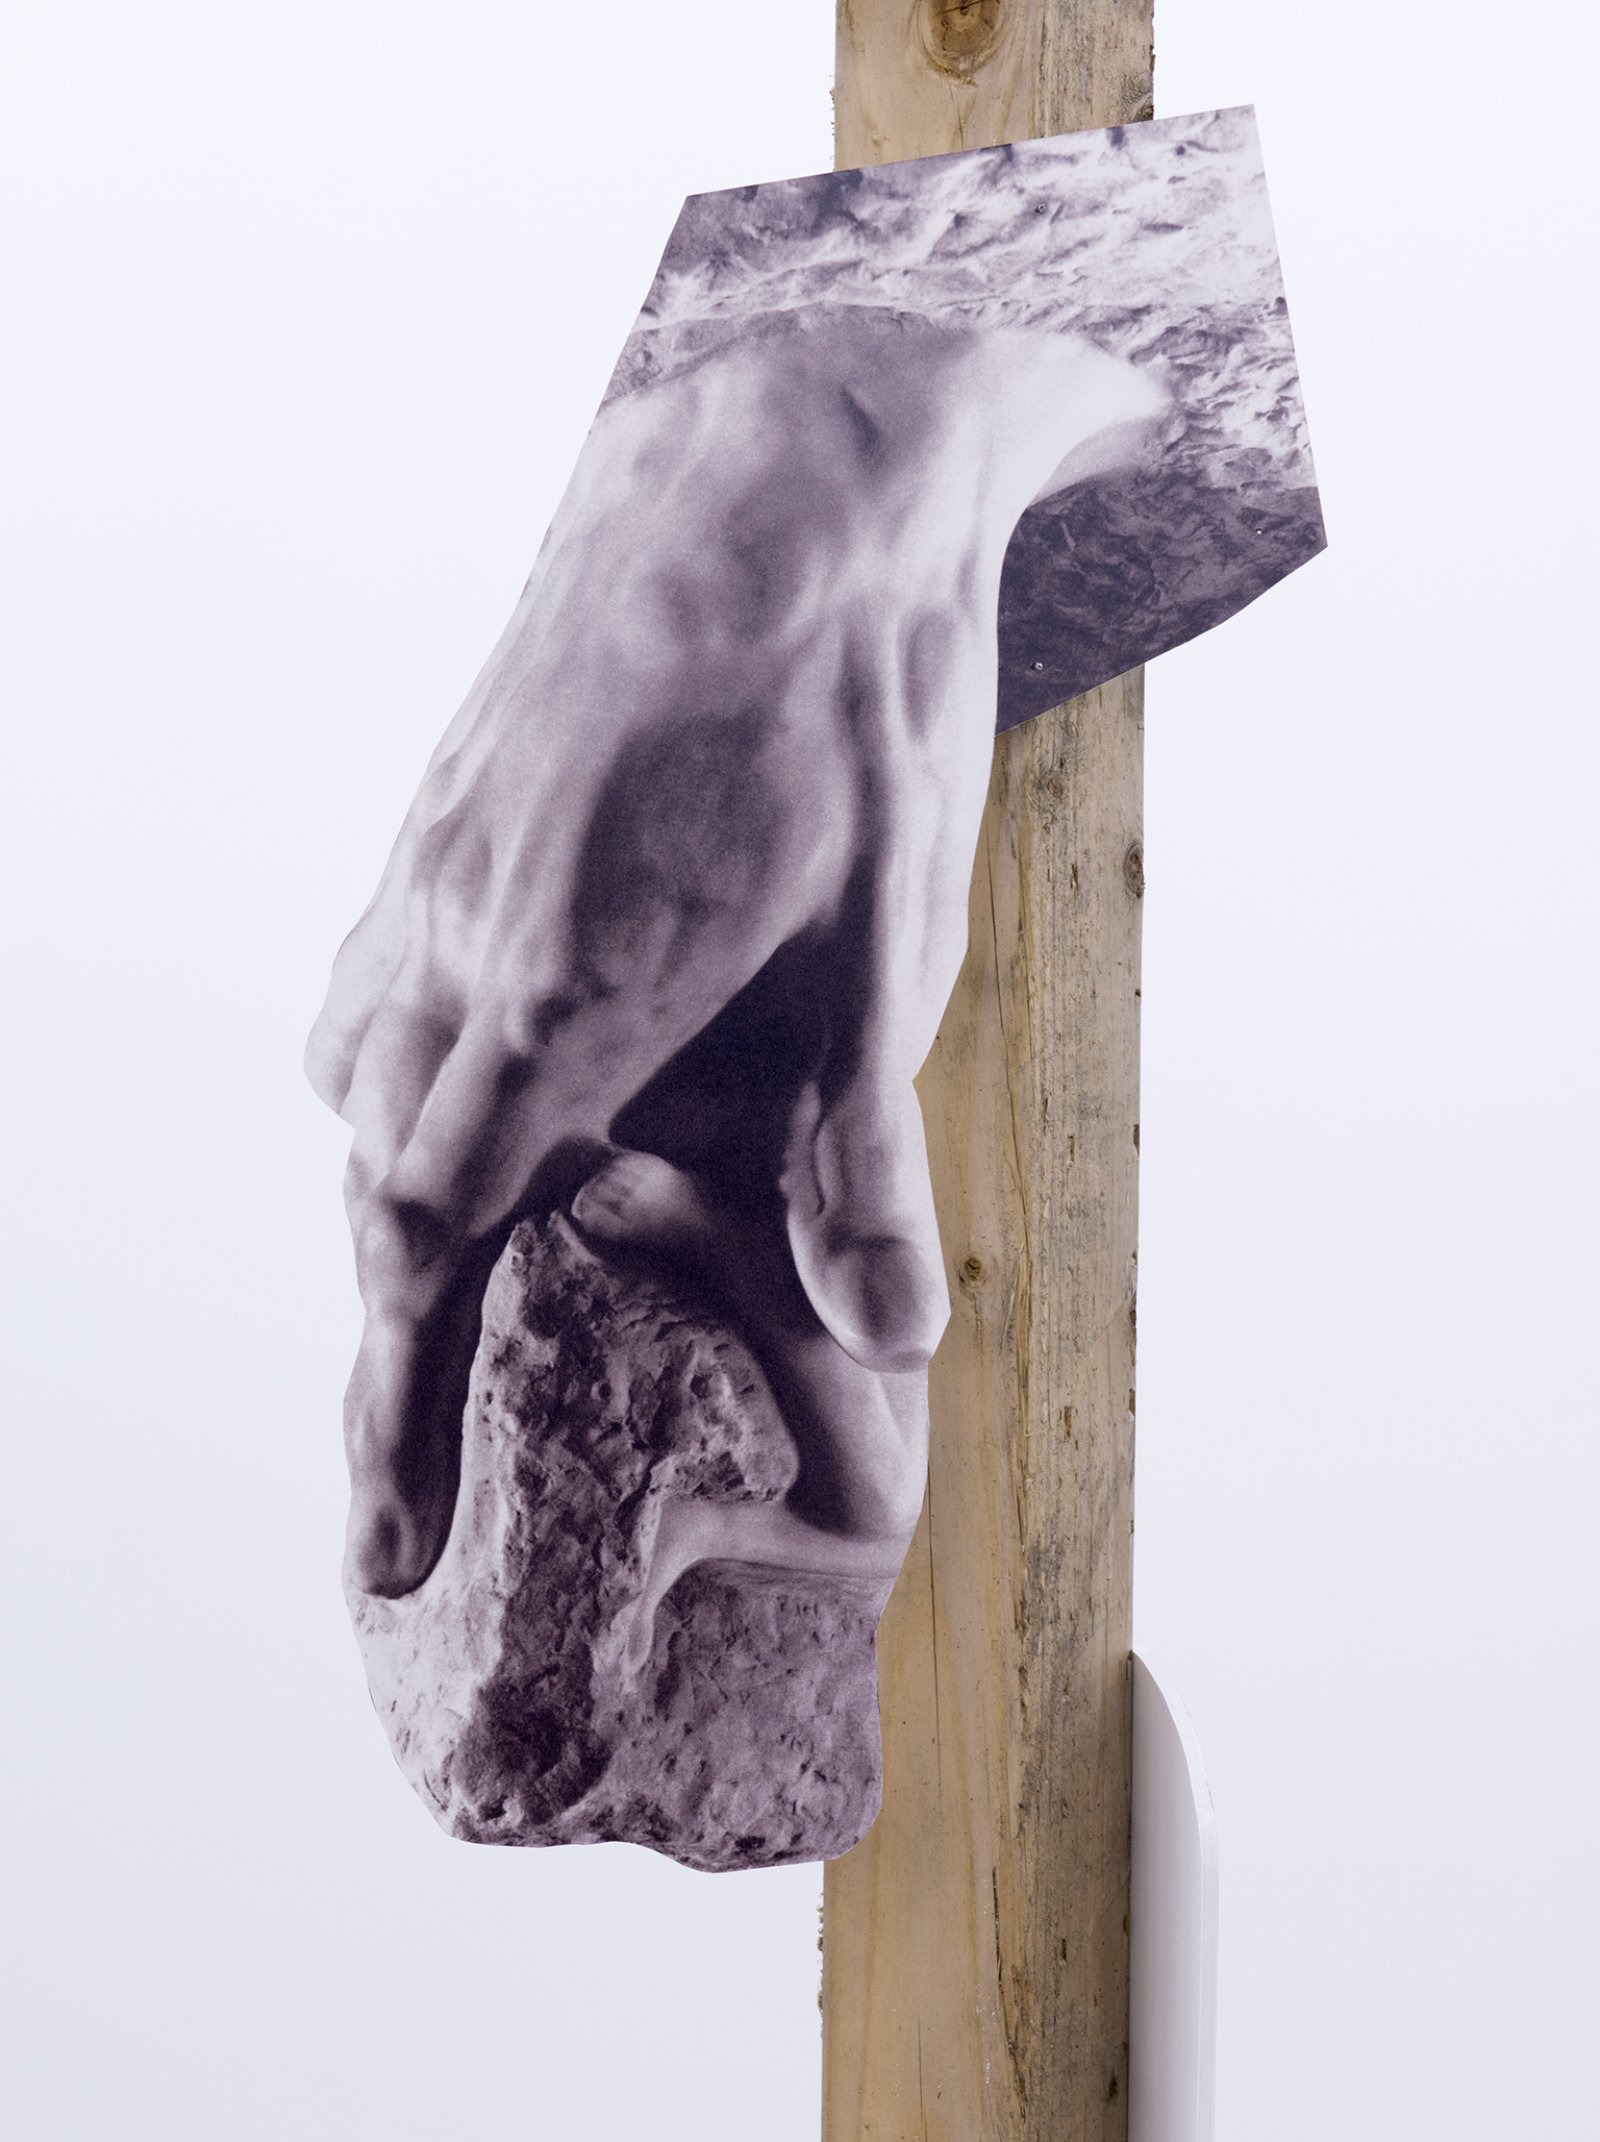 Geoffrey Farmer, The part of the cane, which curves under to meet the fingers.... (detail), 2014, douglas fir pole, 6 photographs mounted on foamcore, 192 x 4 x 4 in. (488 x 9 x 9 cm) by Geoffrey Farmer